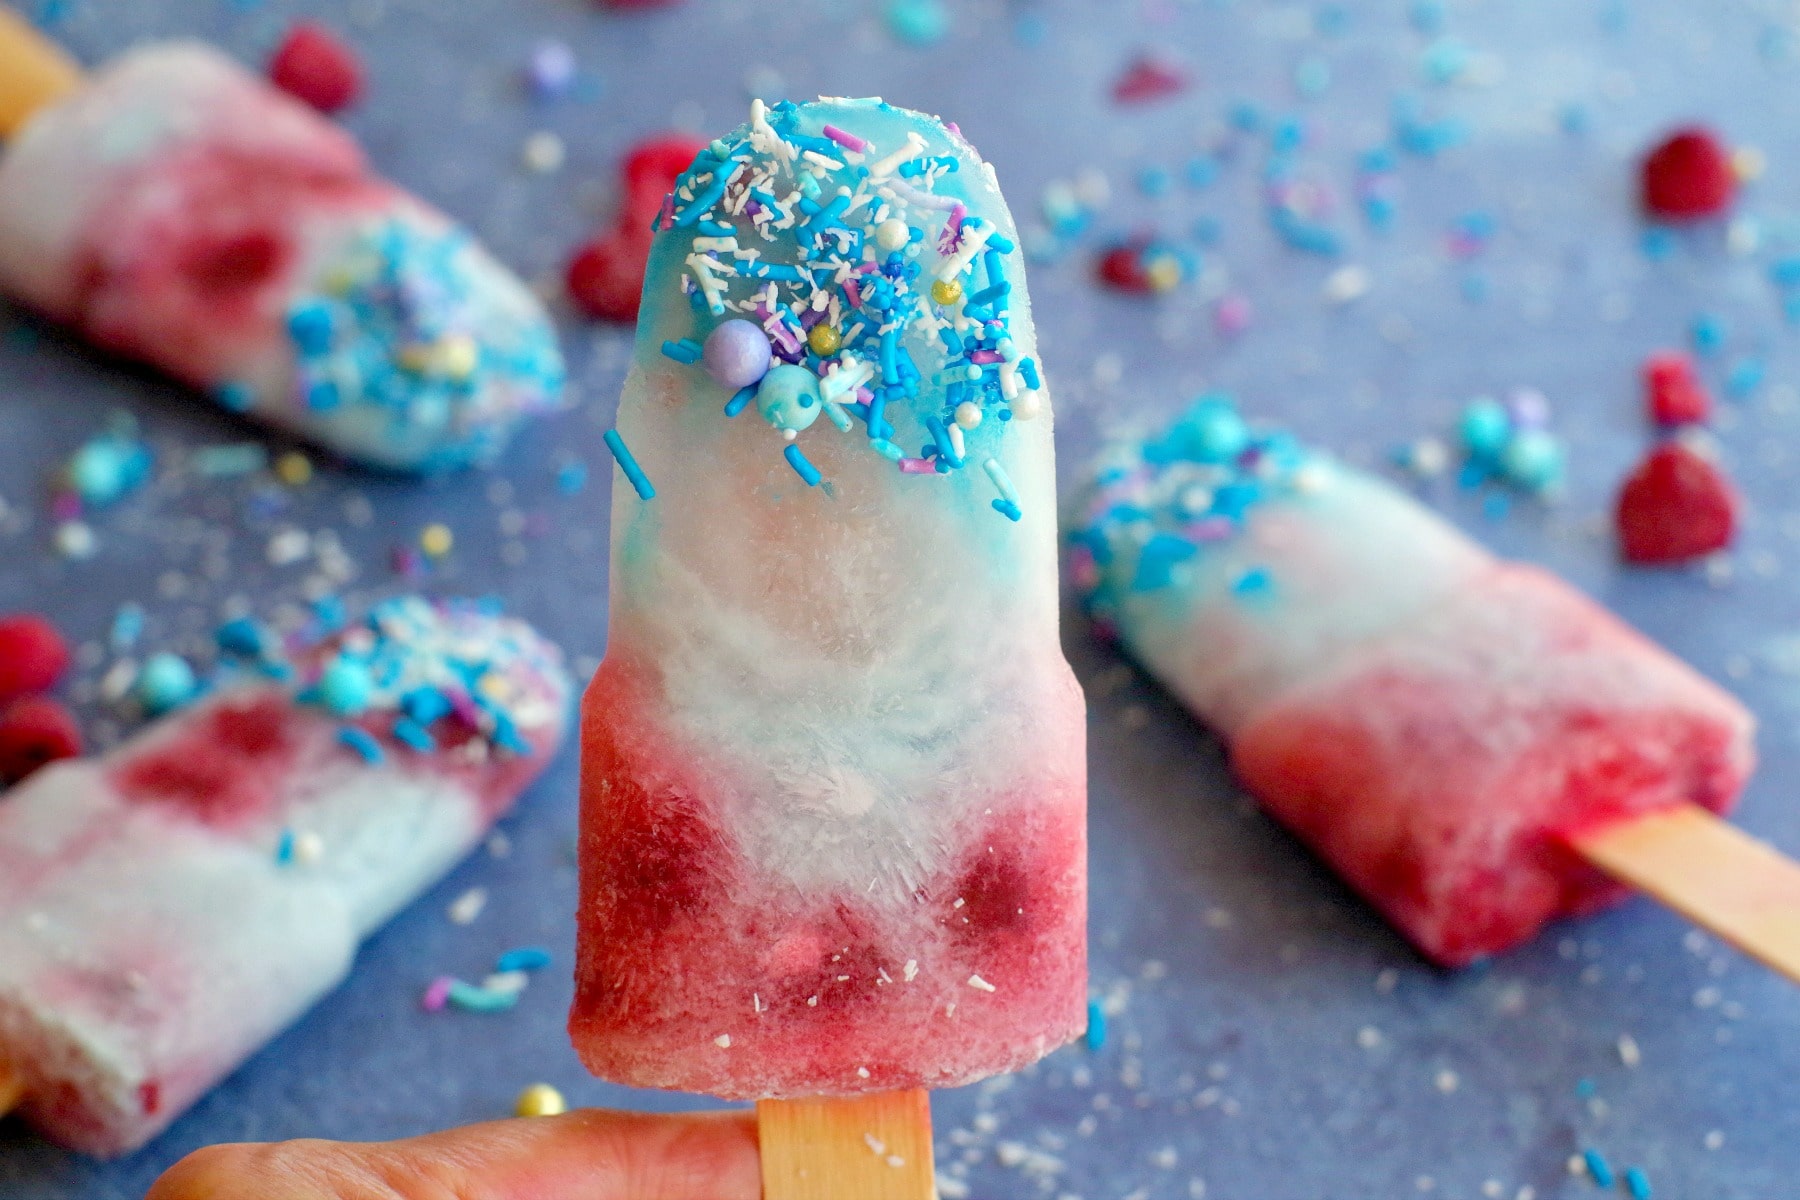 coconut blue raspberry popsicle being held up in front of 3 other popsicles